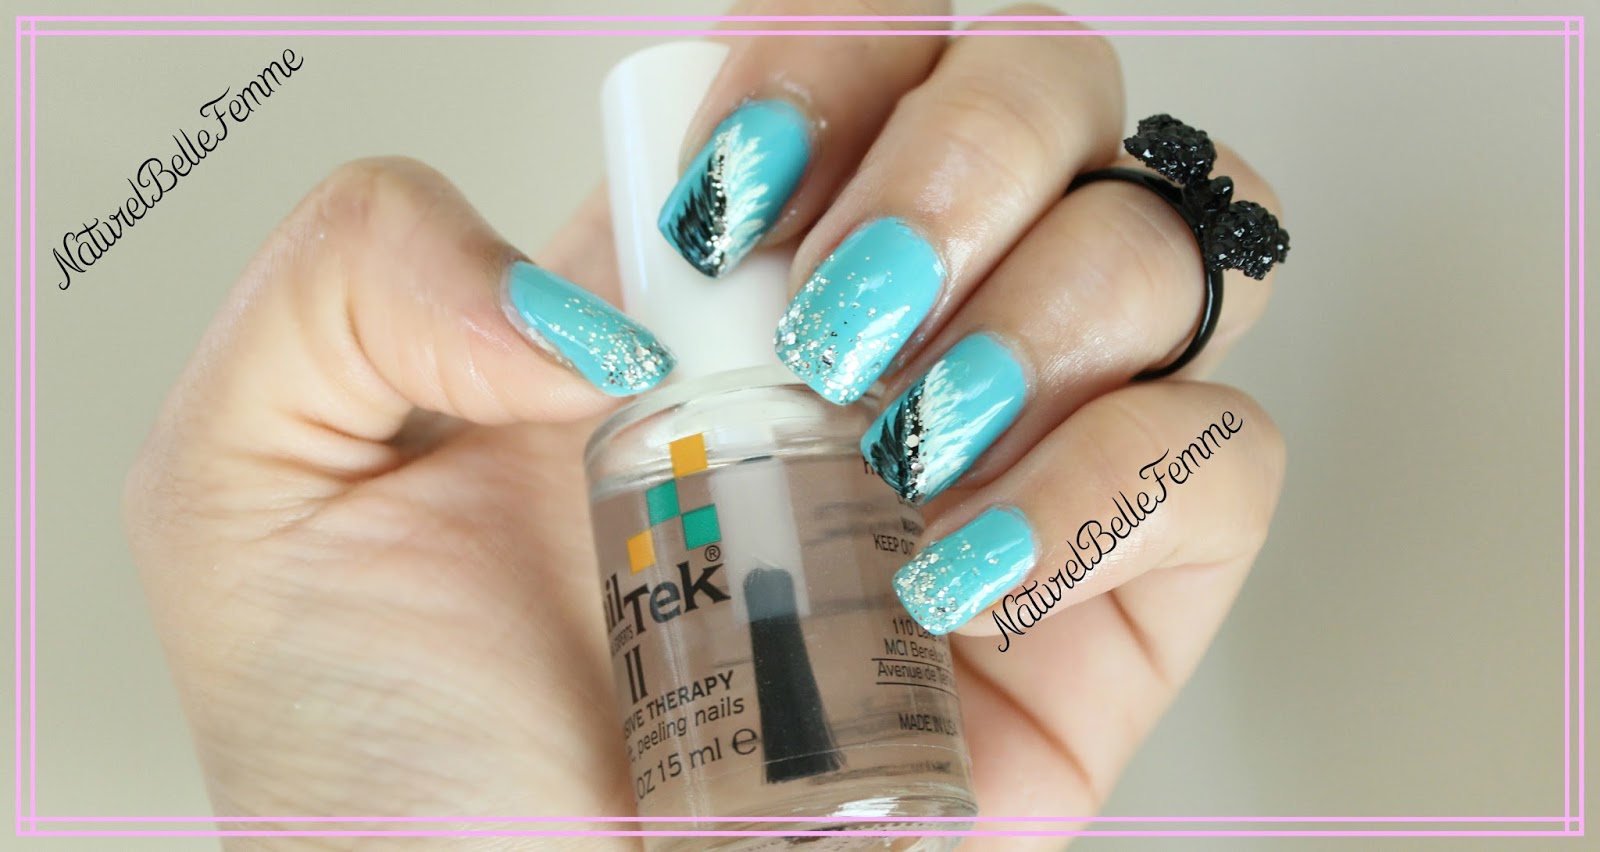 5. Feather Nail Art Tutorial - wide 4